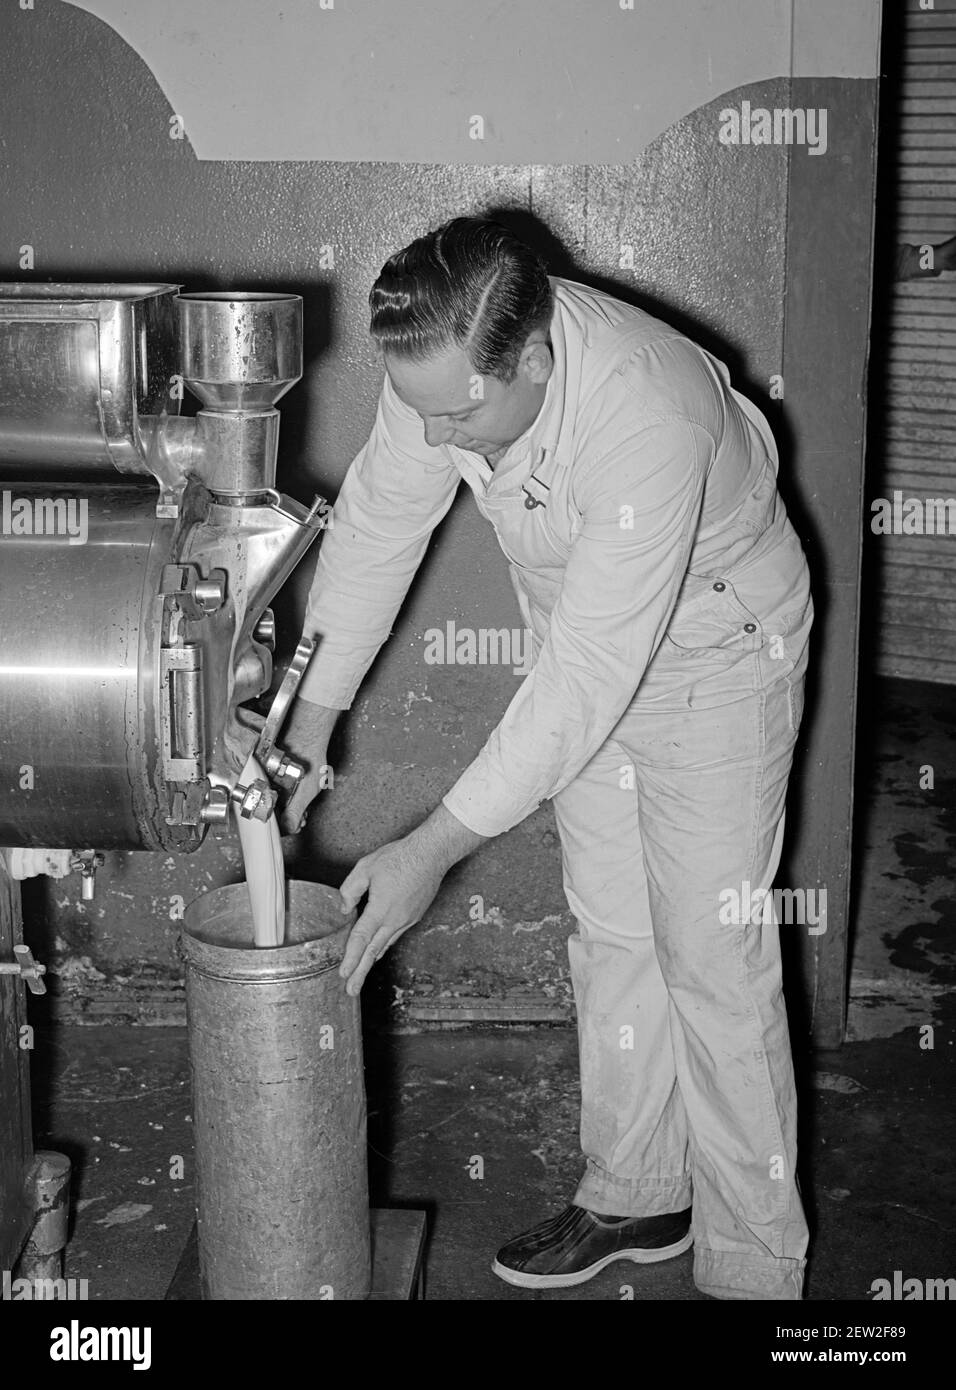 Filling can with ice cream mix. Creamery, San Angelo, Texas. Later it will be placed in freezer, November 1939 Stock Photo